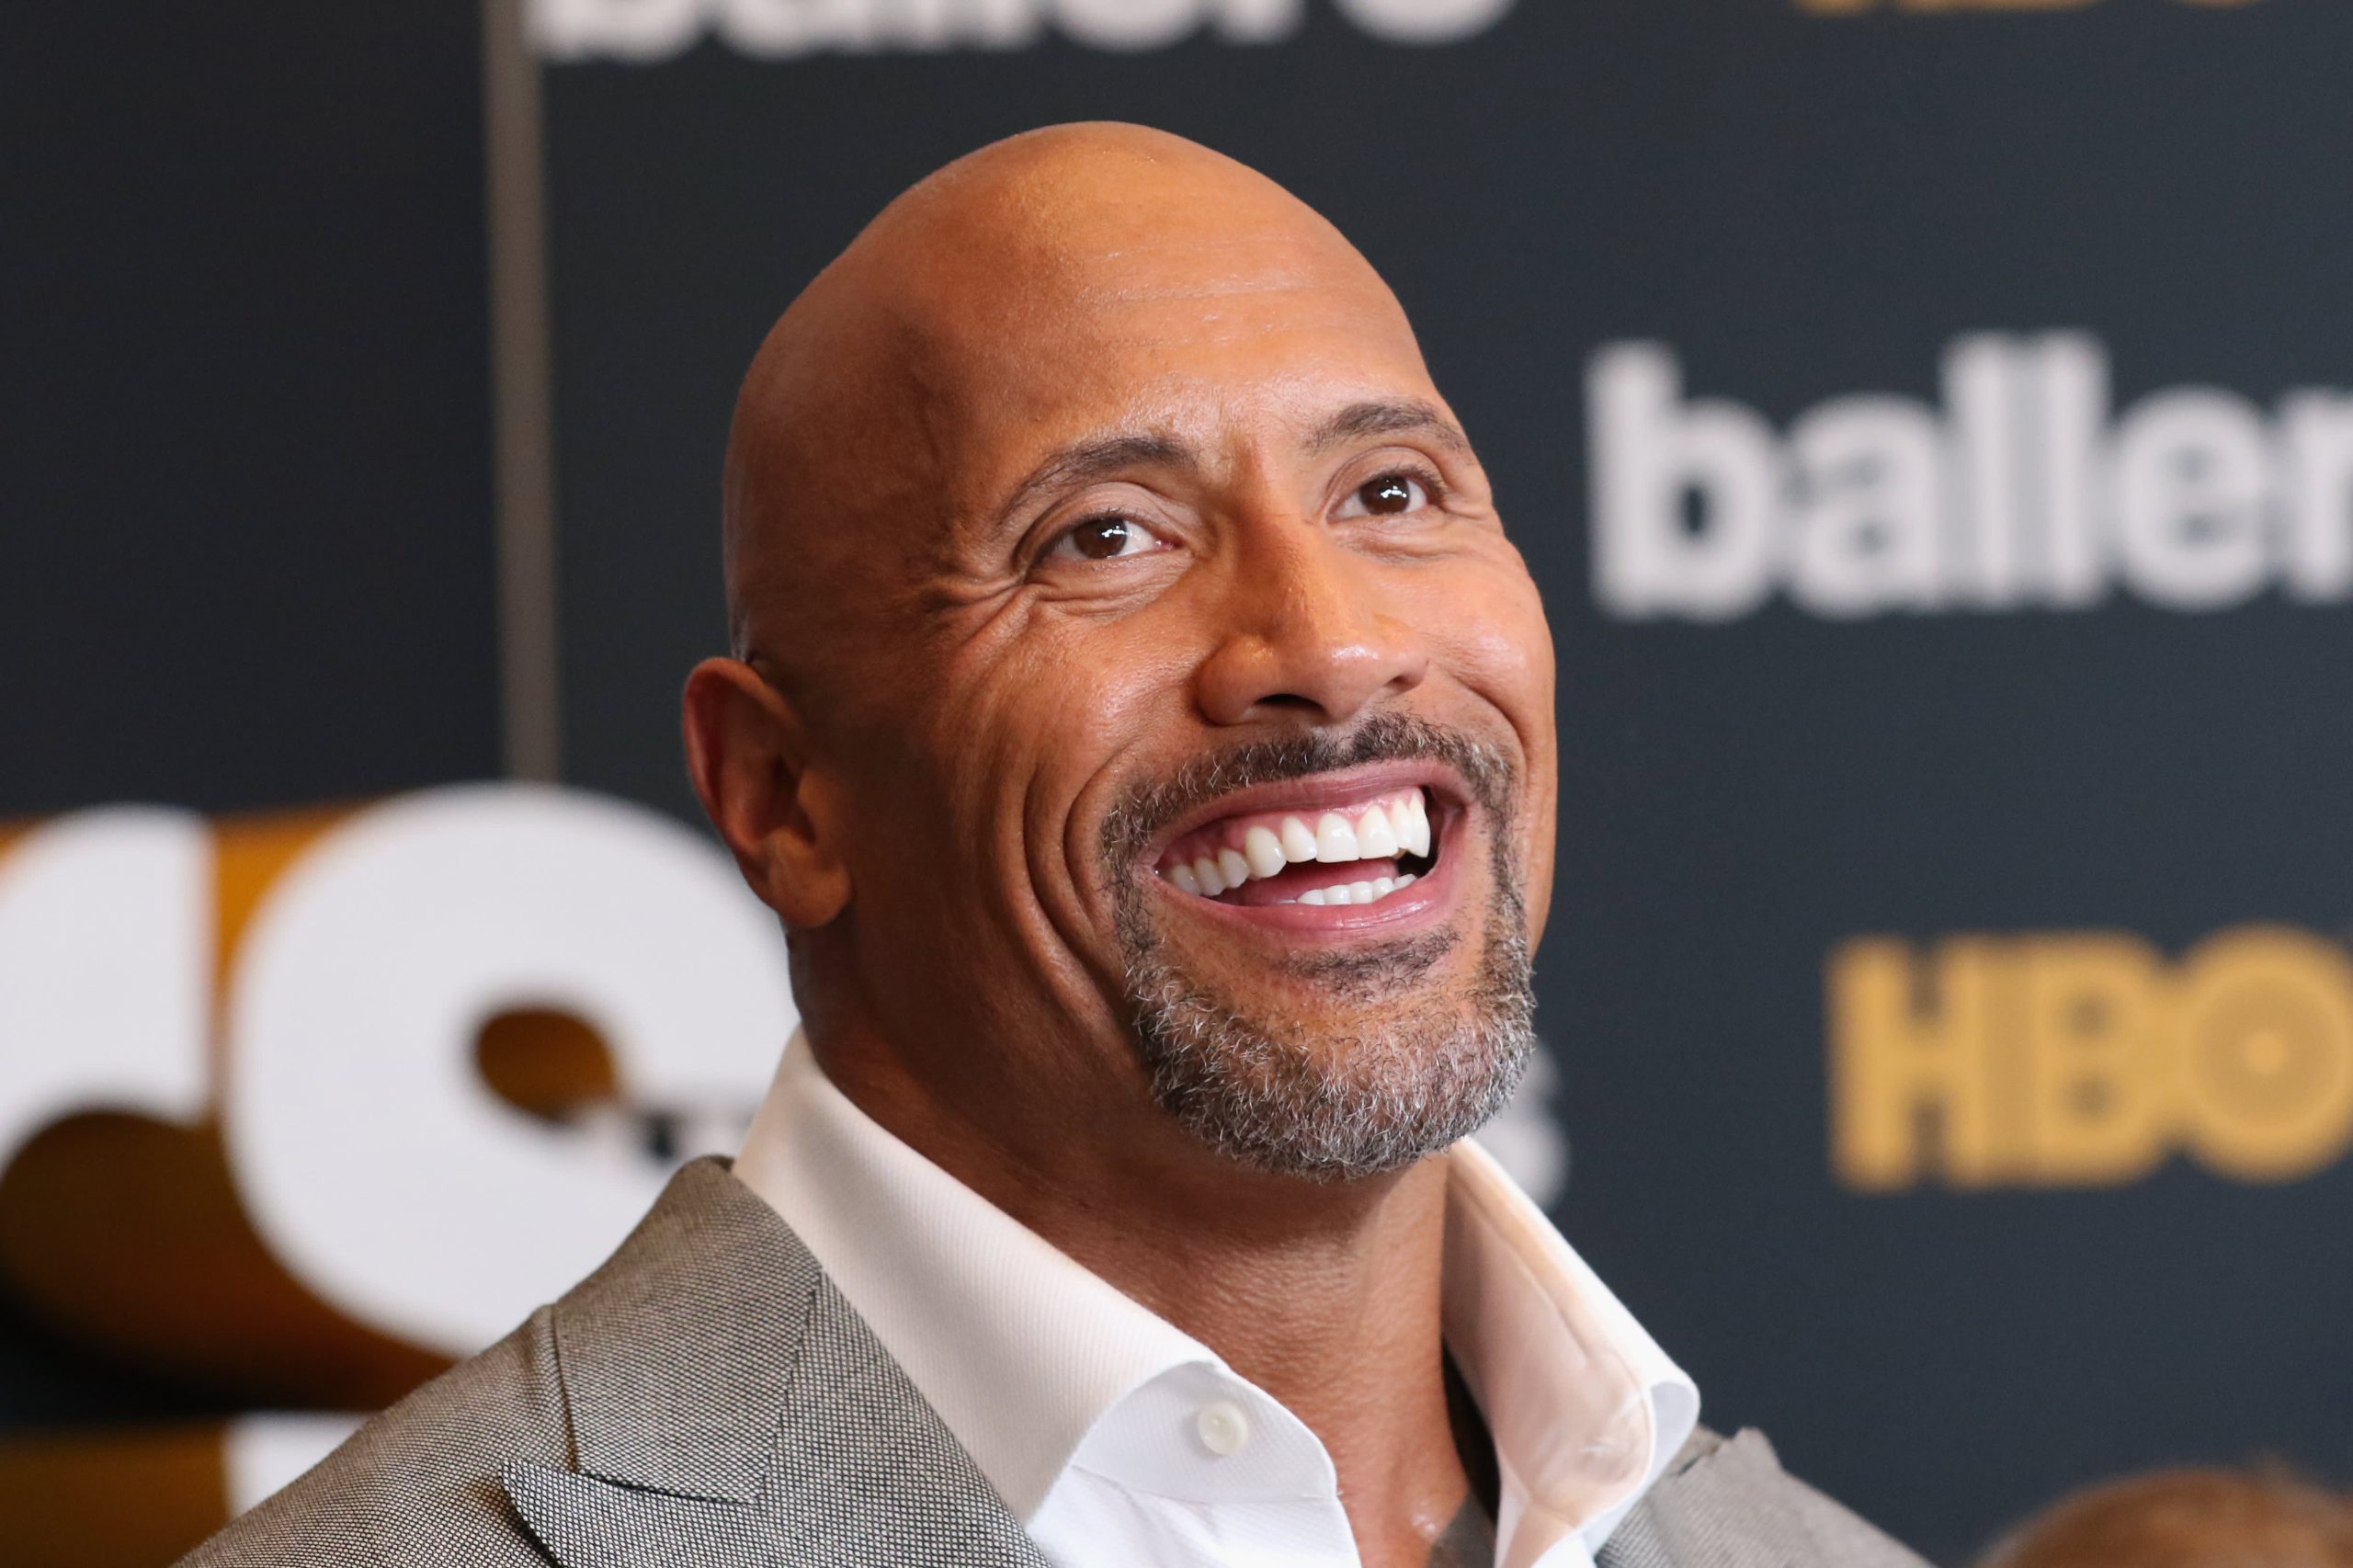 Dwayne Johnson-most loved person in the world